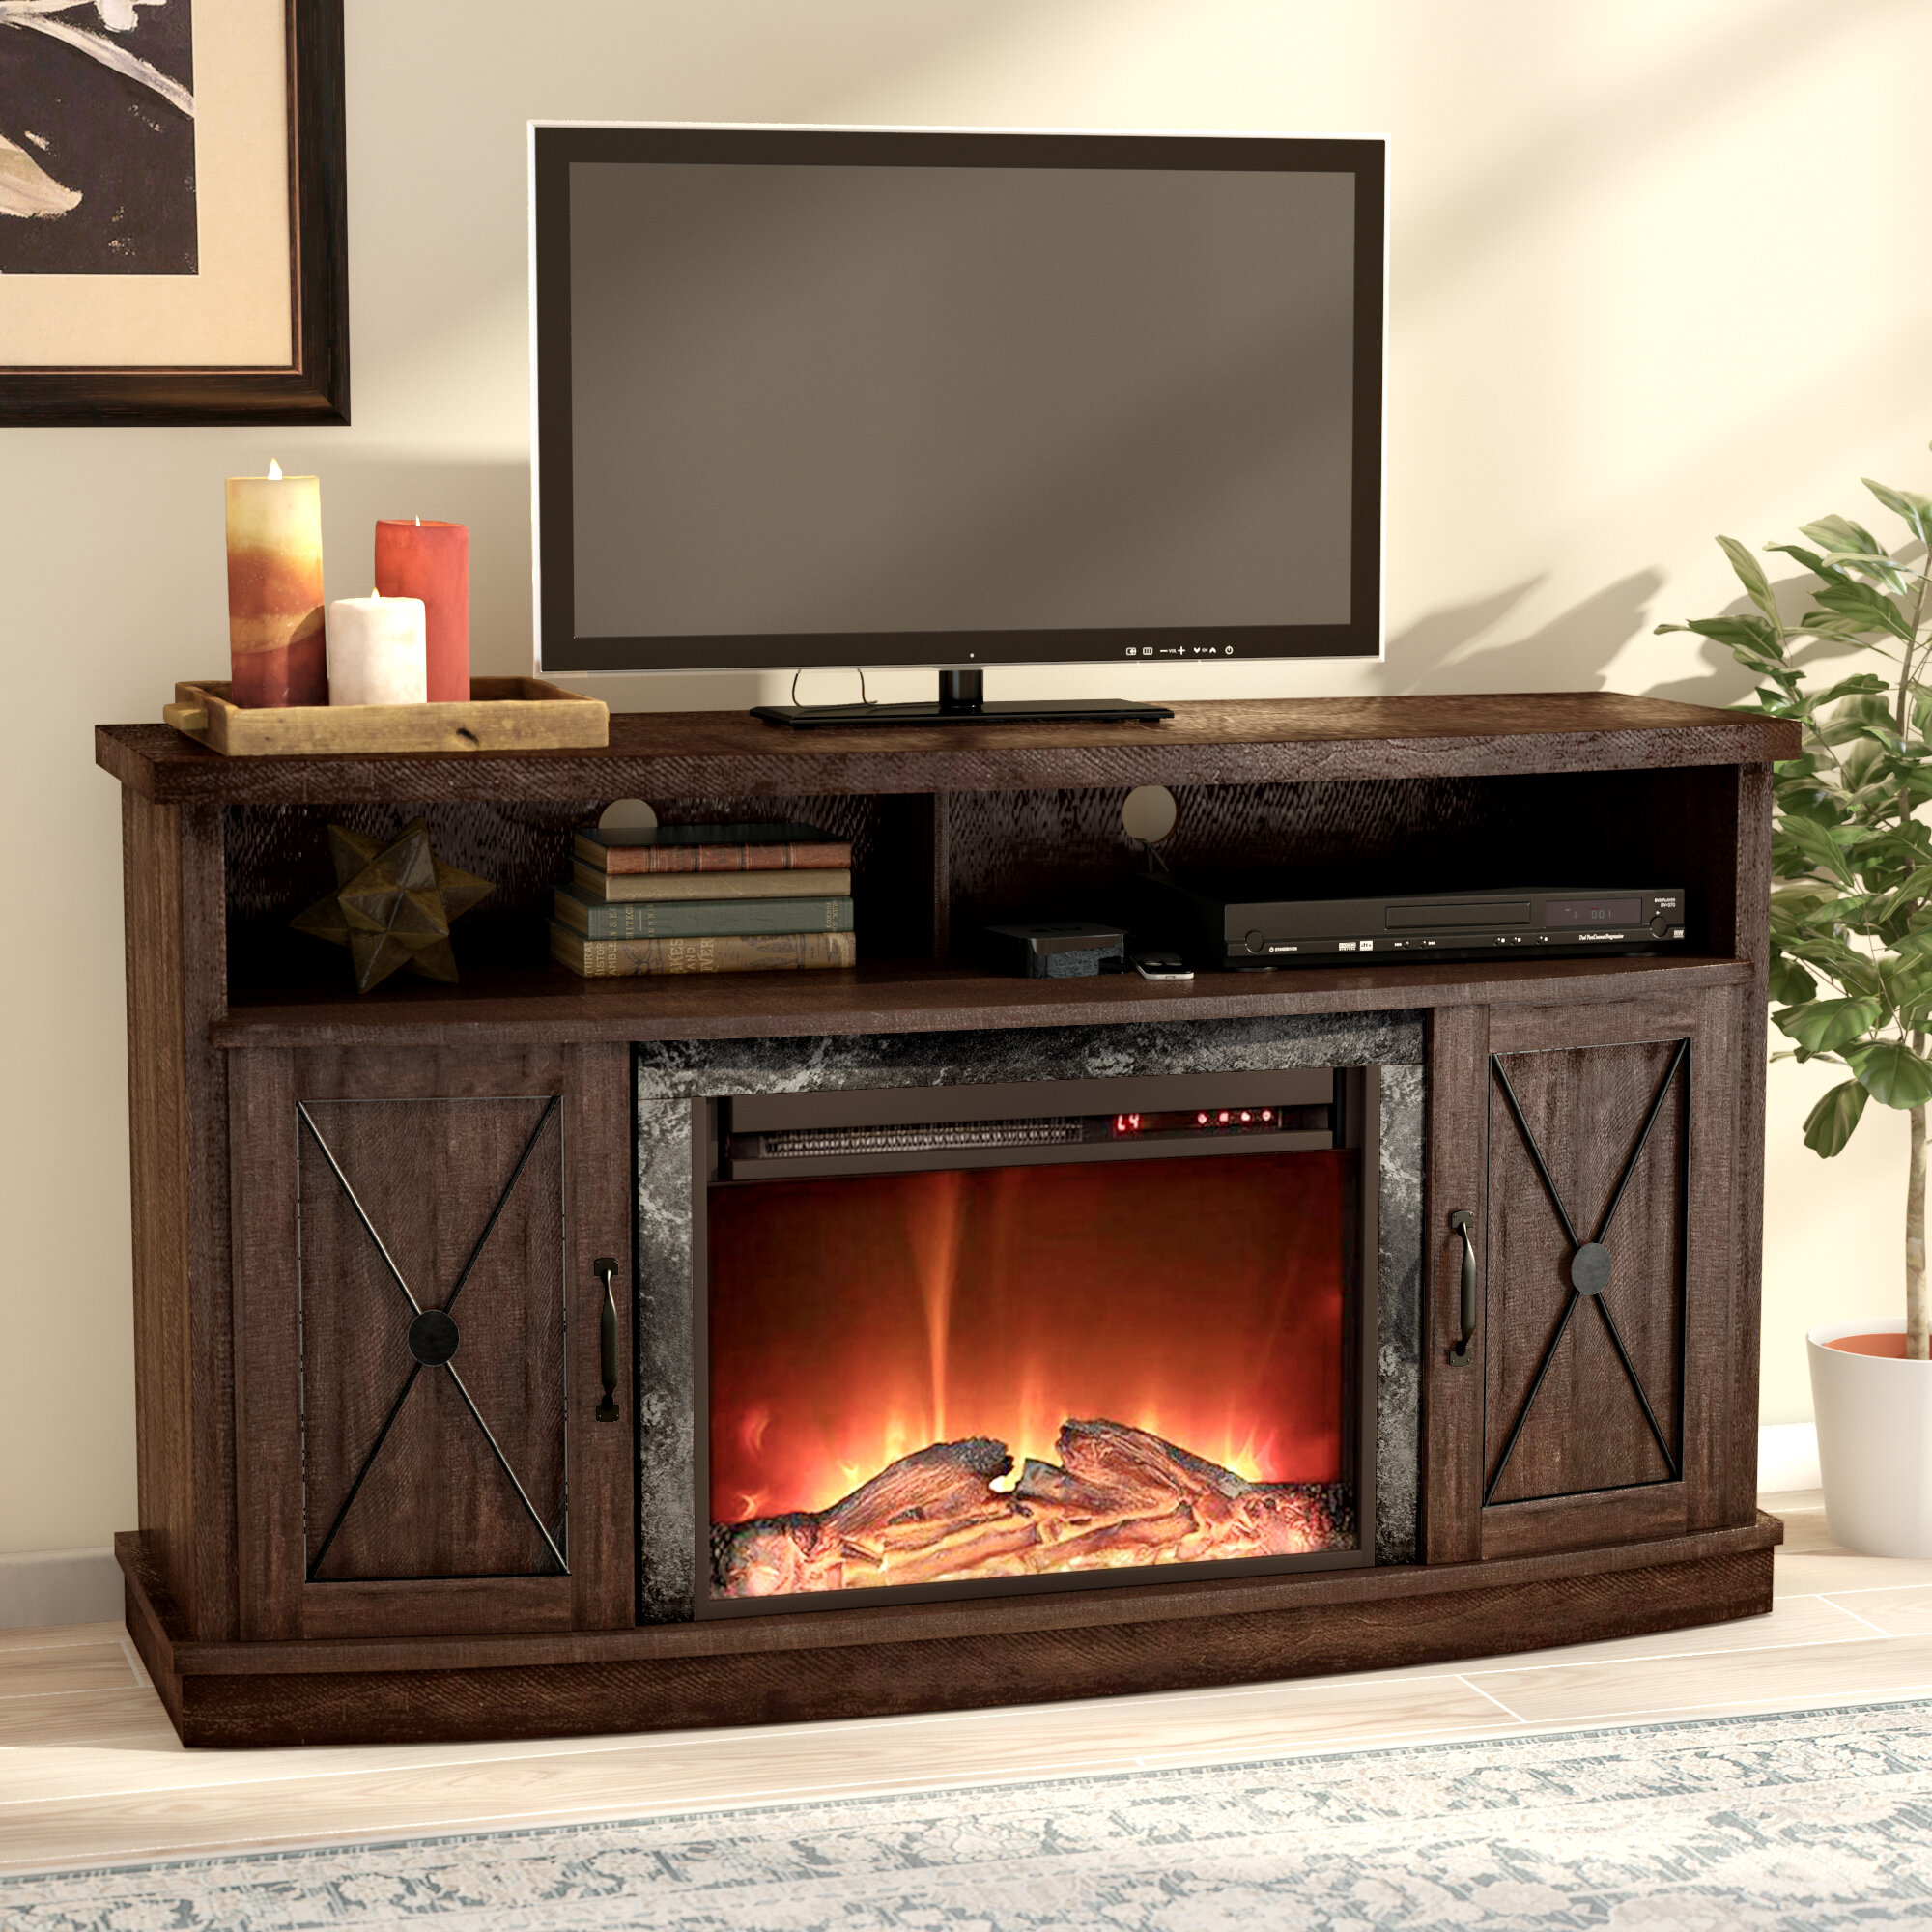 Best Electric Fireplace Tv Stand Best Of Media Fireplace with Remote